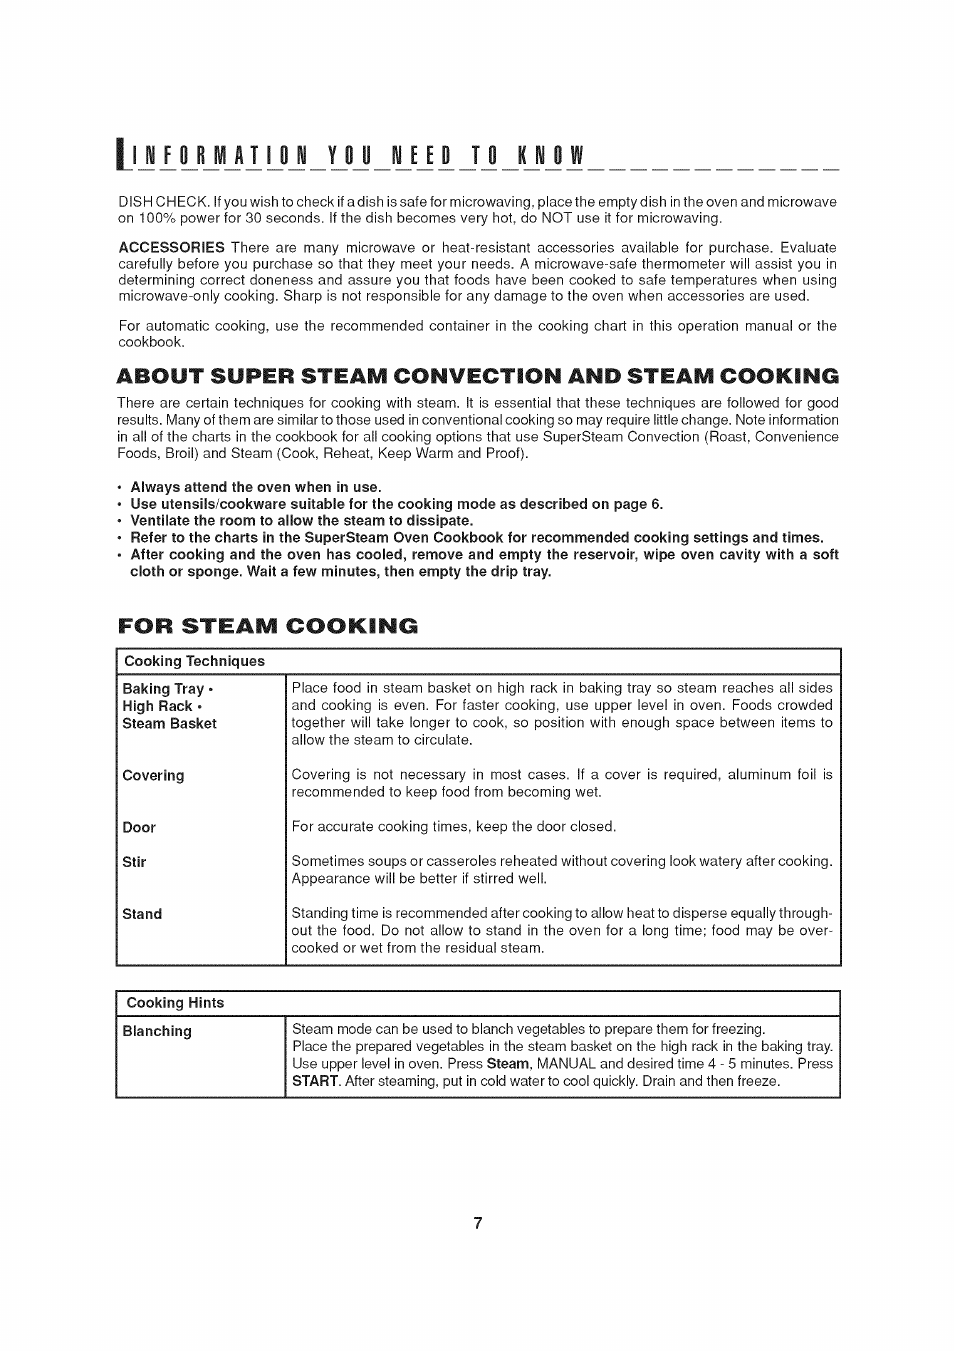 About super steam convection and steam cooking, Always attend the oven when in use, For steam cooking | Li 1 lyjl l»j _l"j _™jj iji jji j | Sharp AX-1200 User Manual | Page 9 / 43